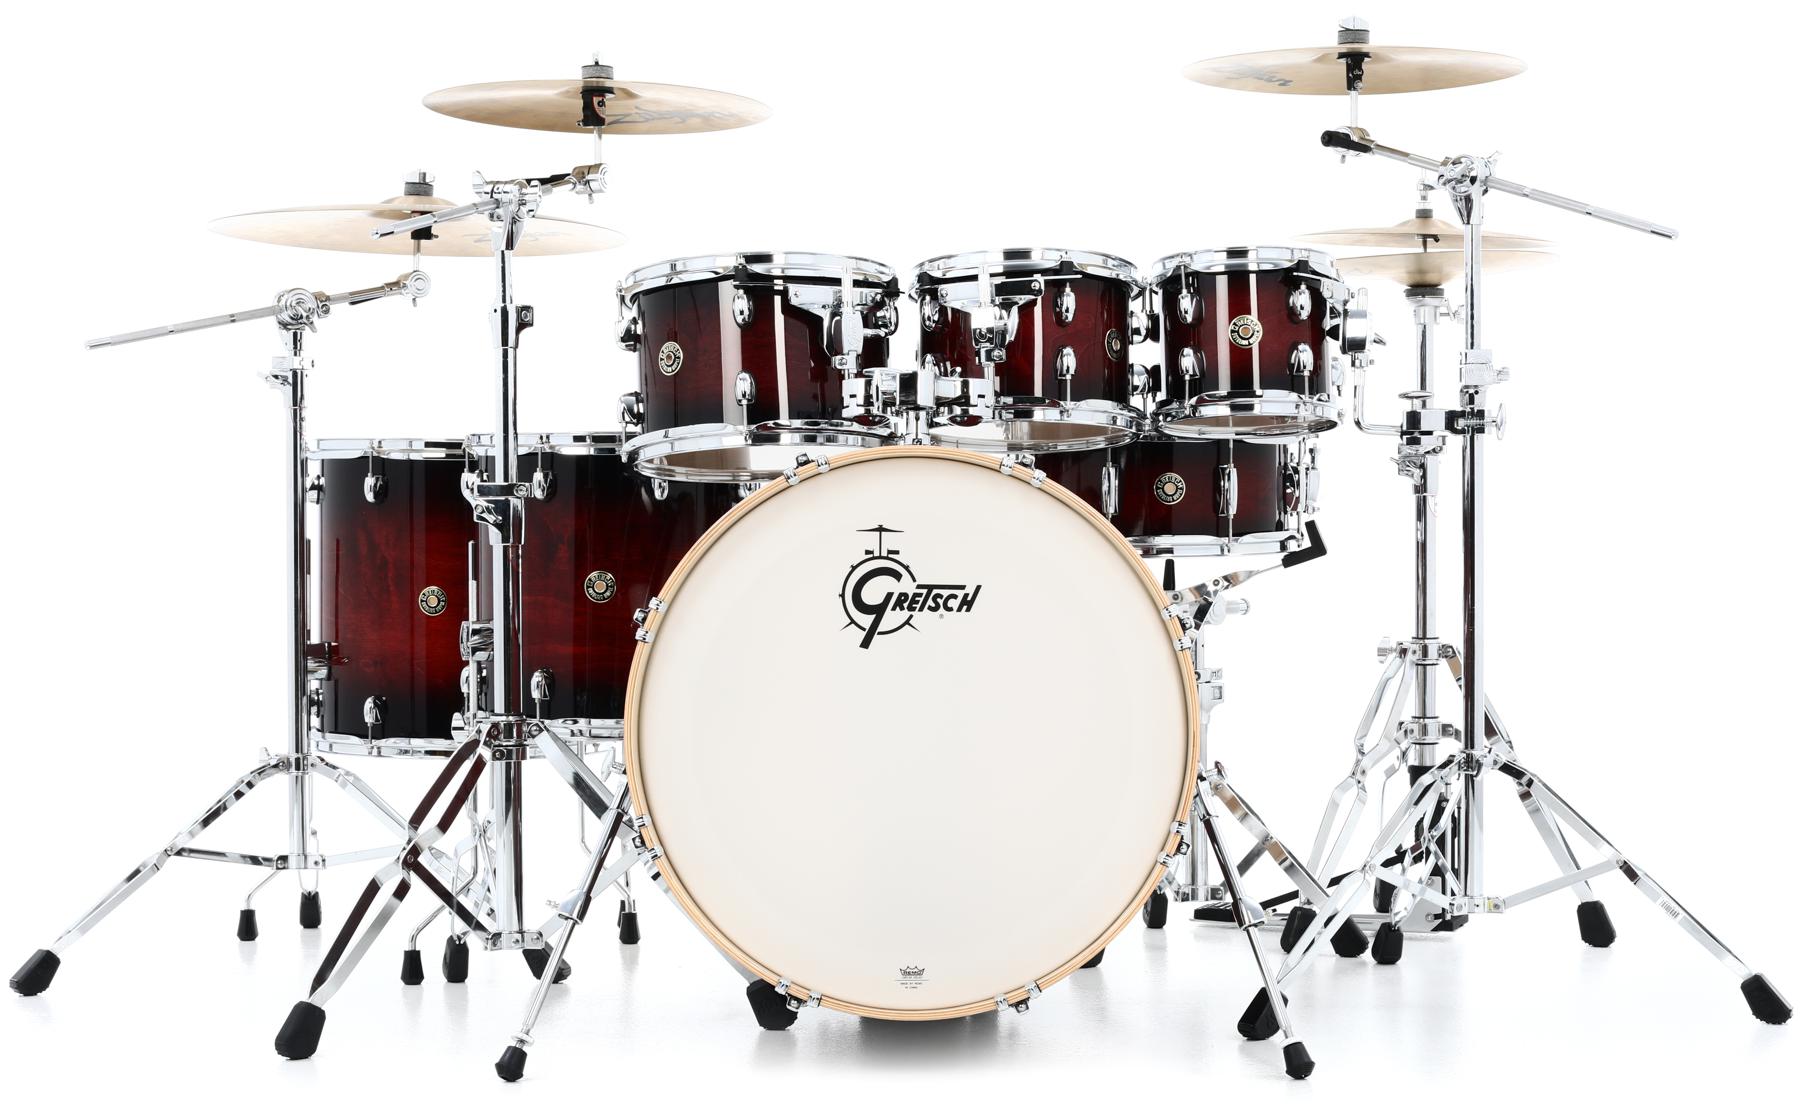 Gretsch Drums Catalina Maple CM1-E826P 7-piece Shell Pack with Snare Drum - Deep Cherry Burst